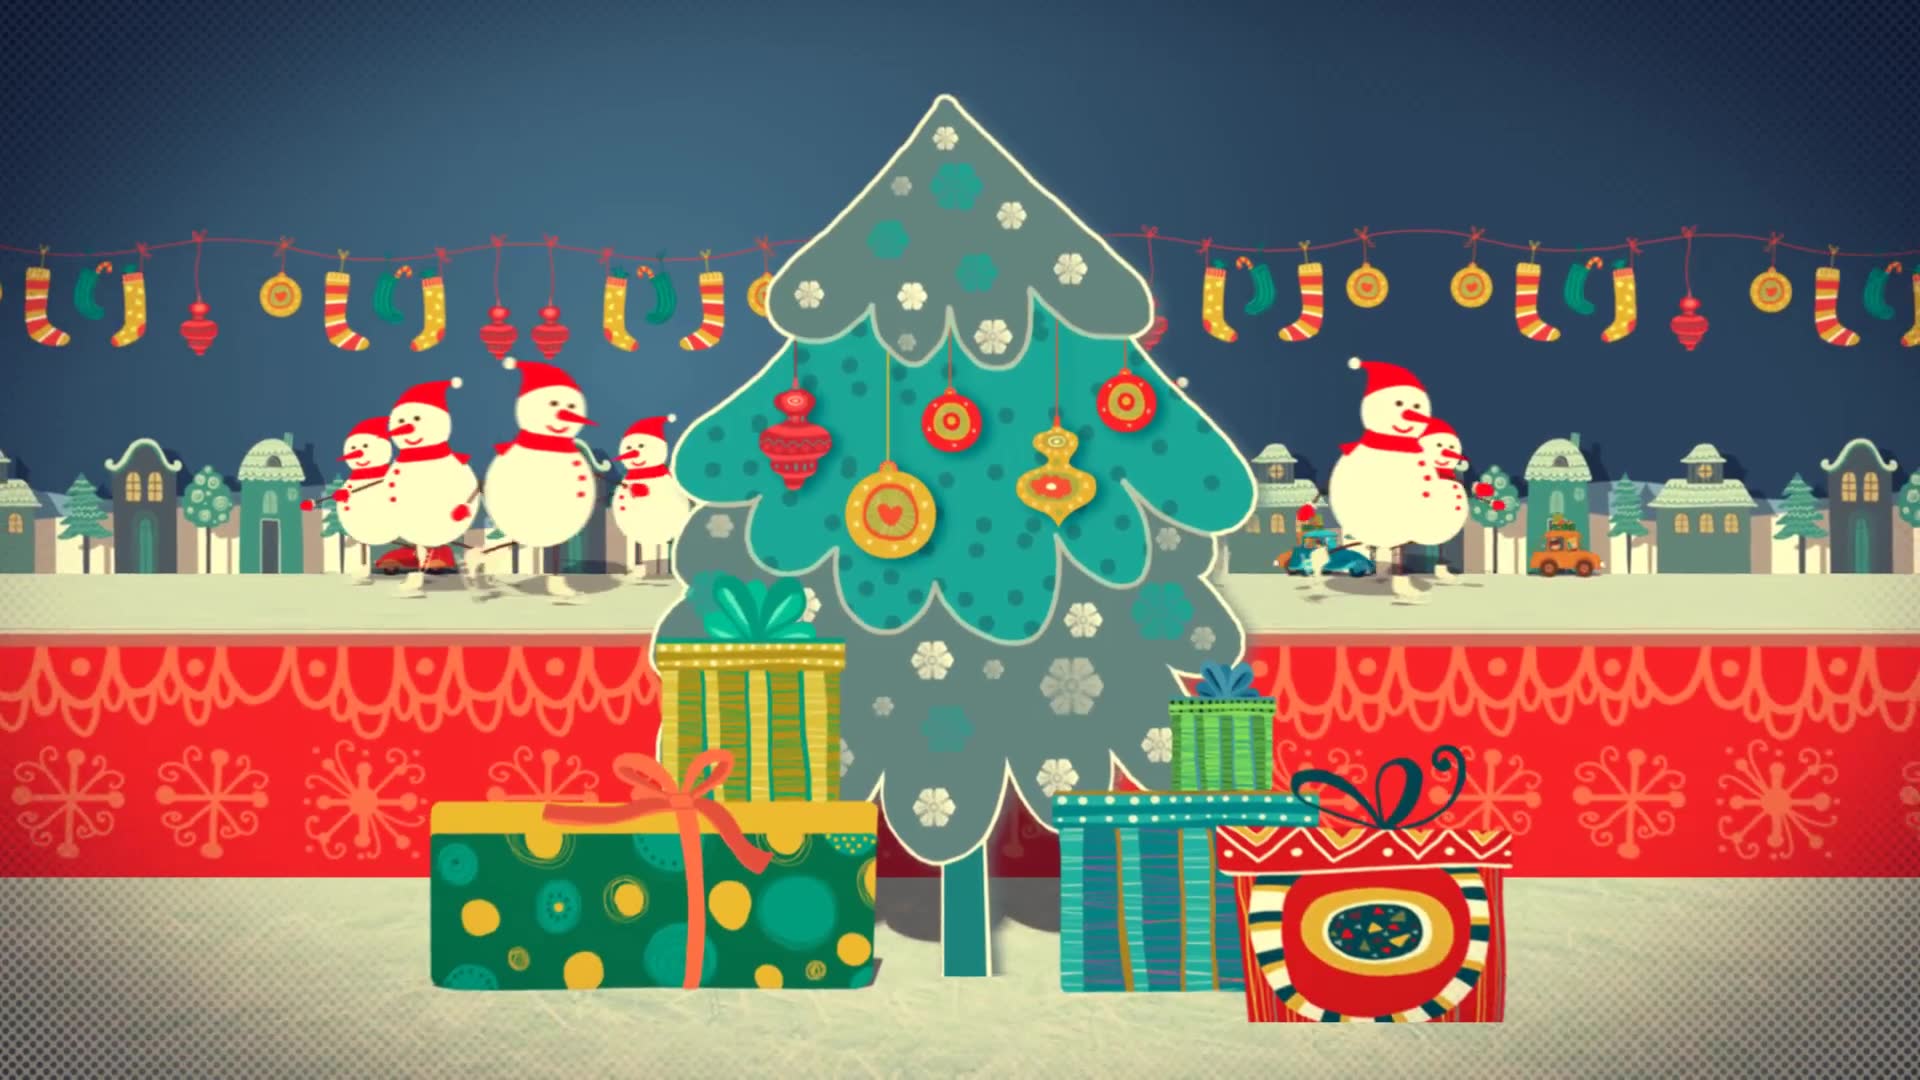 Christmas & New Year Opener - Download Videohive 9503080